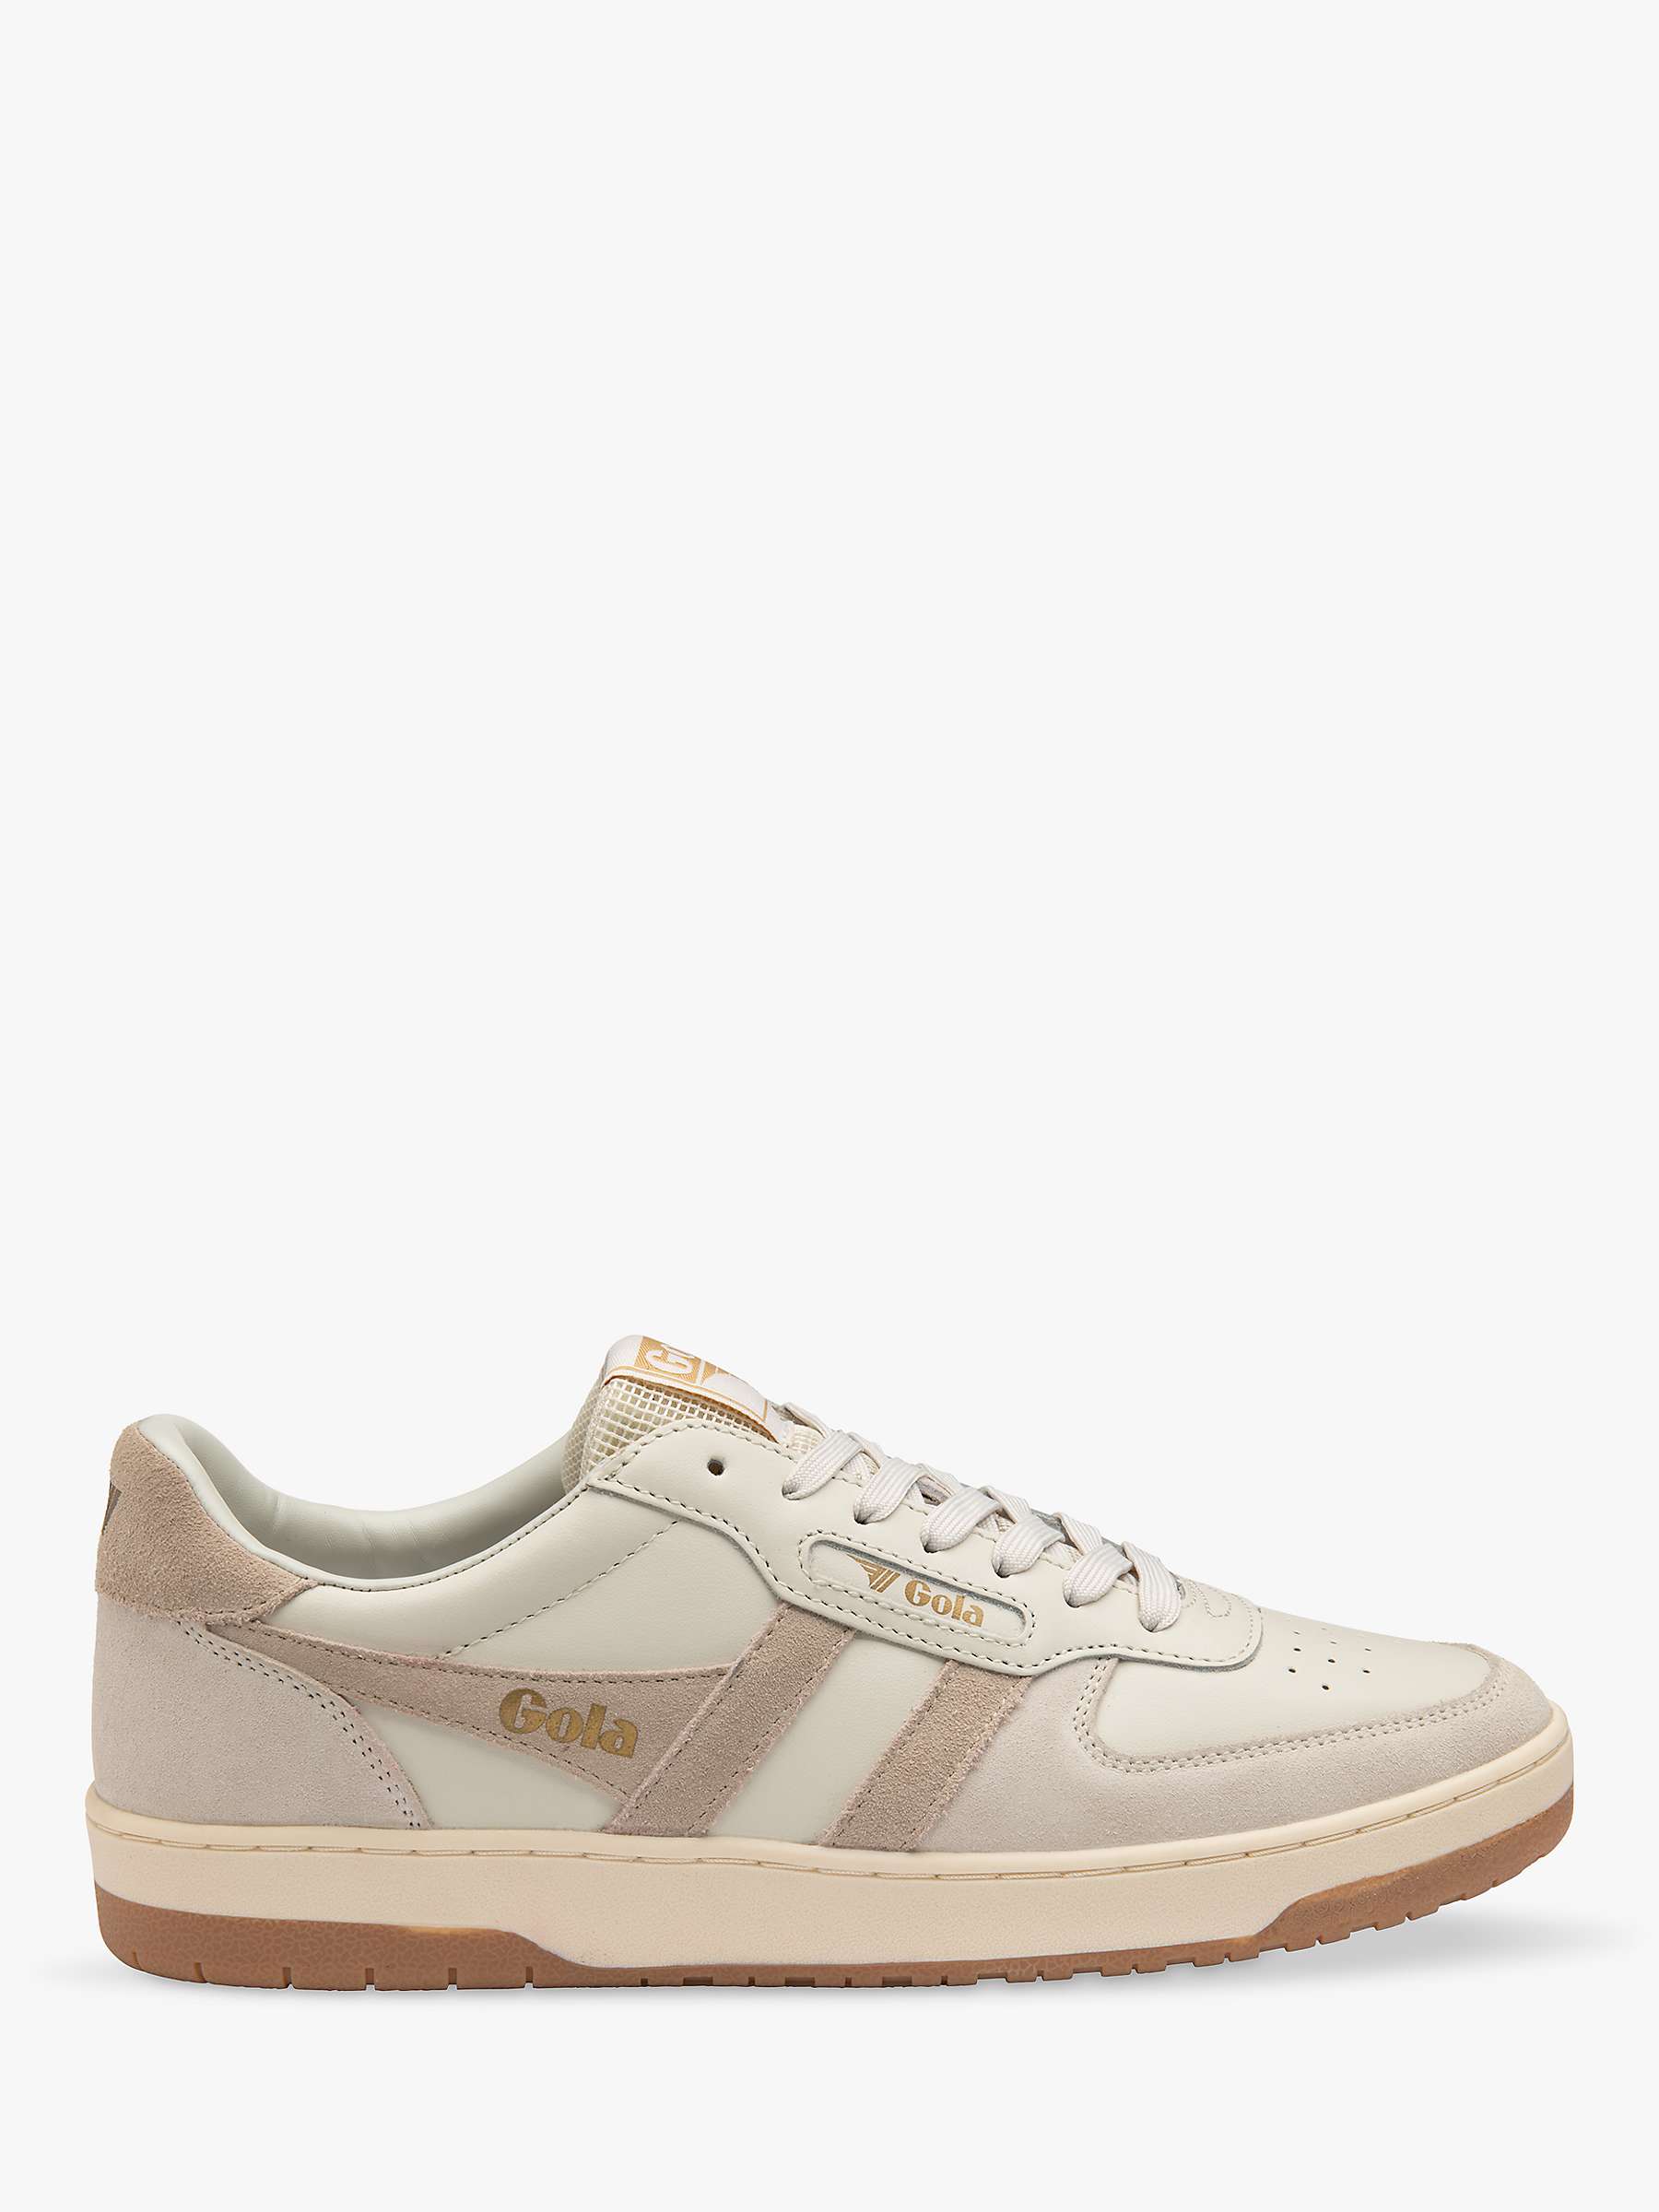 Gola Classics Hawk Leather Lace Up Trainers, Off White/Grey at John ...